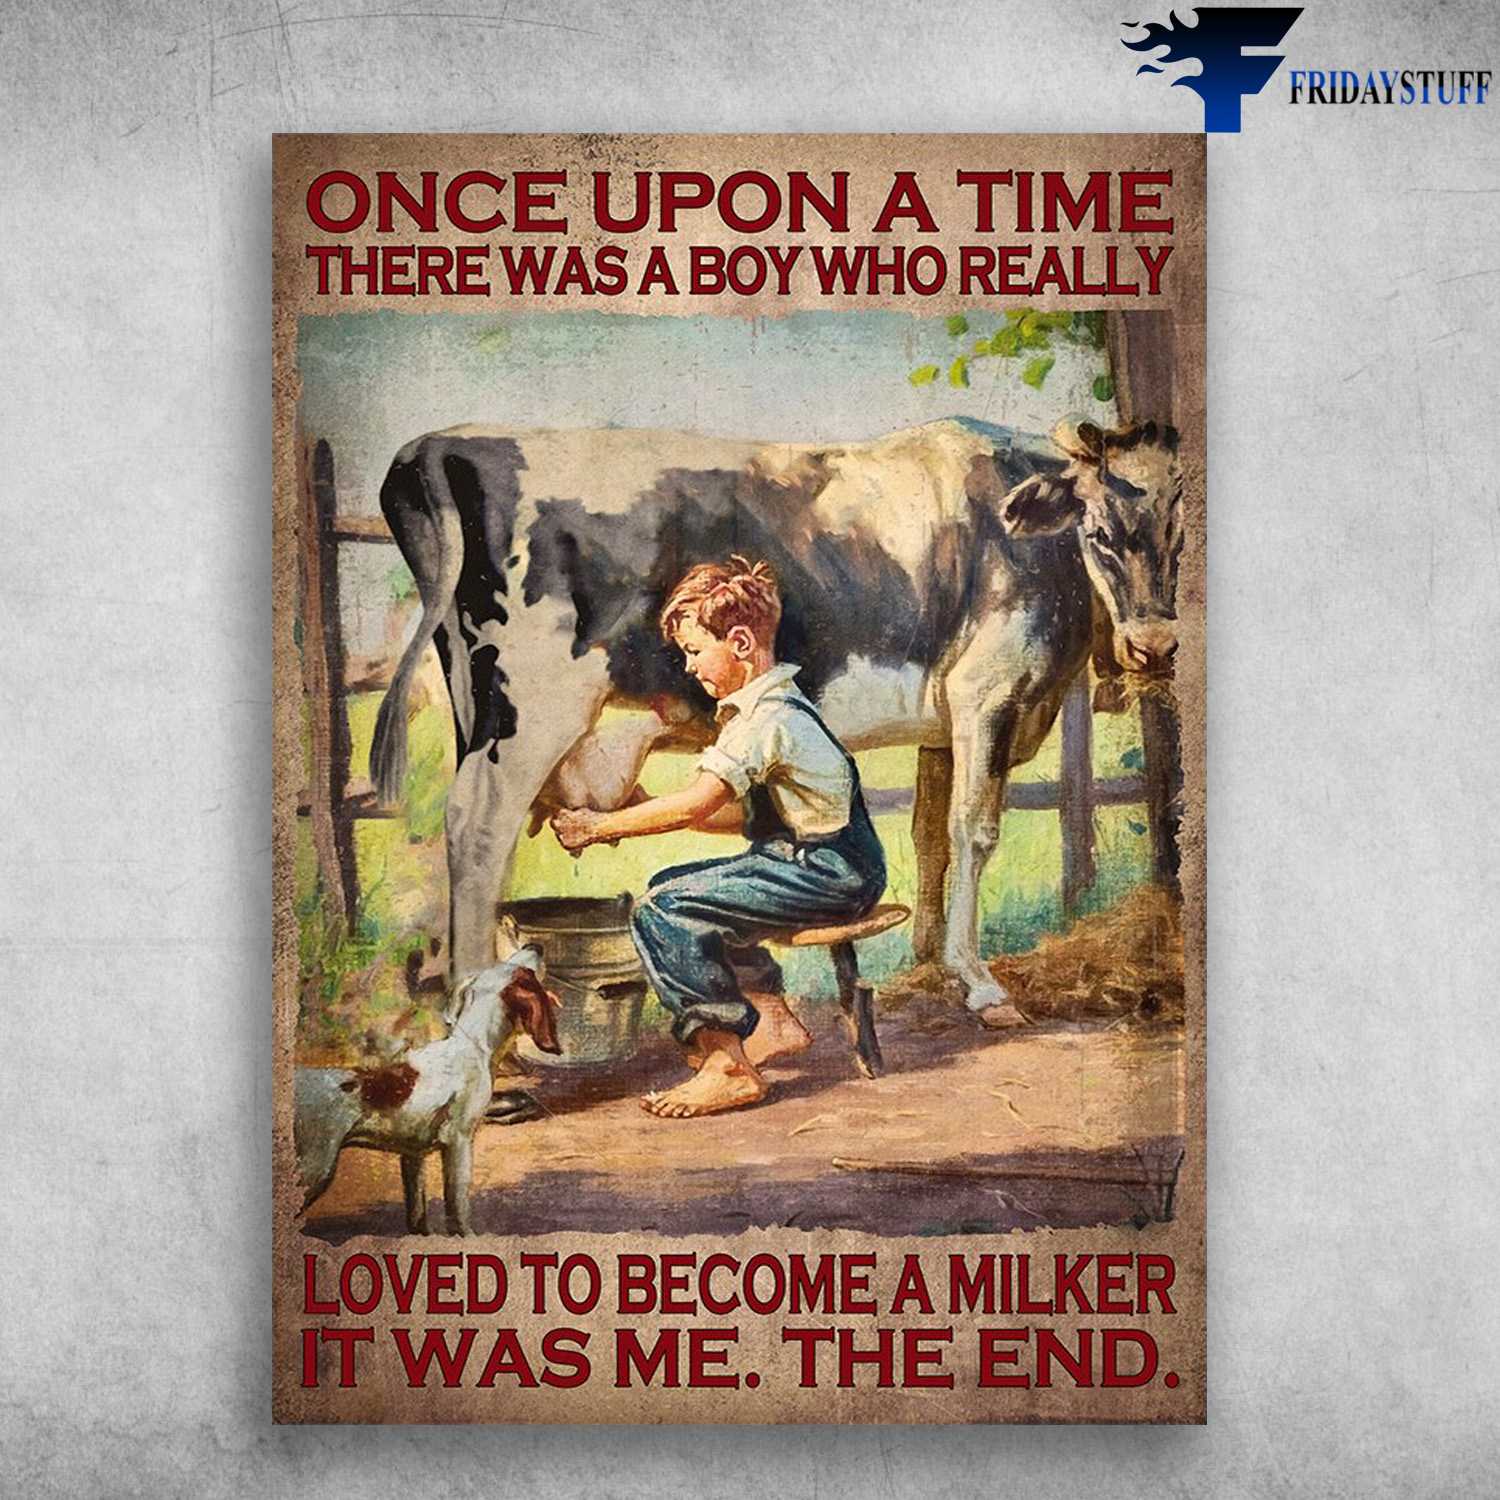 Milker Boy, Dog And Dairy Cow - Once Upon A Time, There Was A Boy, Who Really Loved To Become A Milker, It Was Me, The End